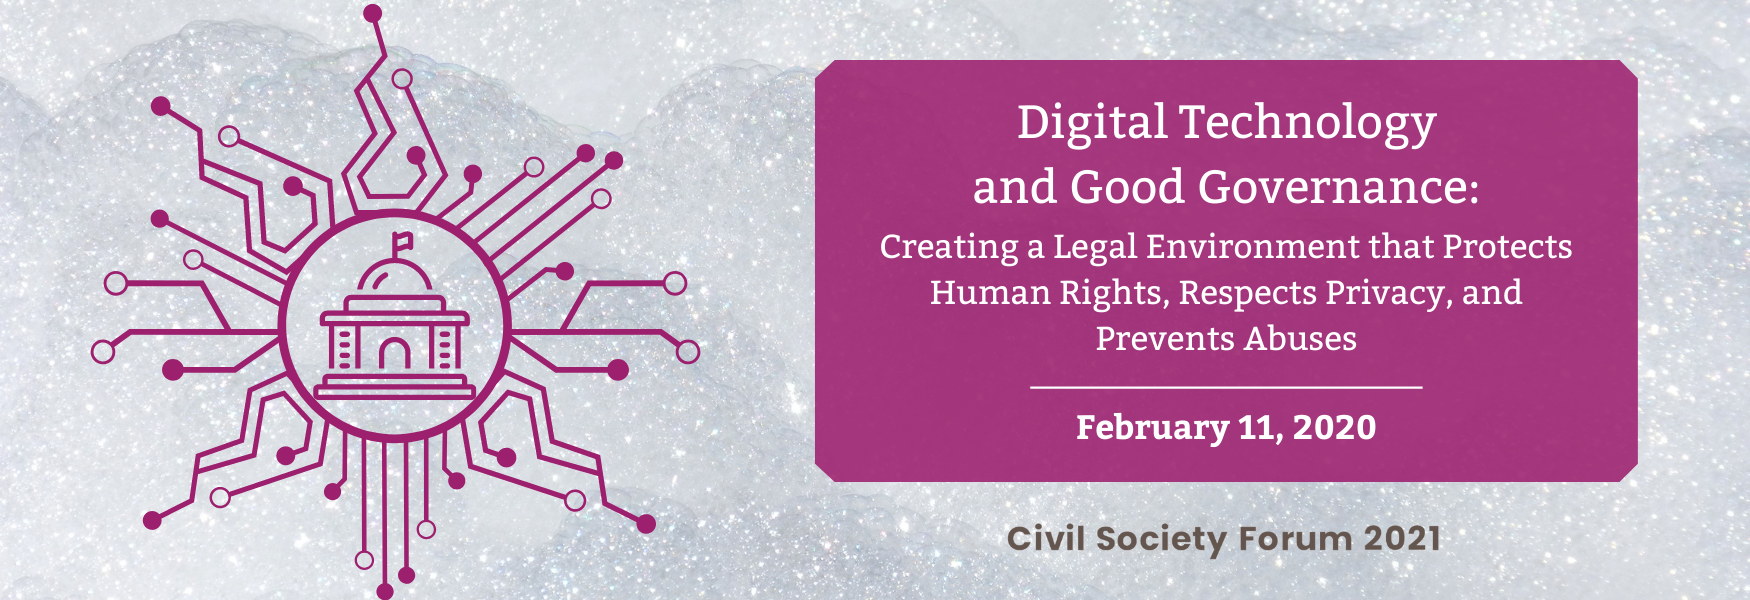 Digital Technology and Good Governance: Creating a Legal Environment that Protects Human Rights, Respects Privacy, and Prevents Abuses